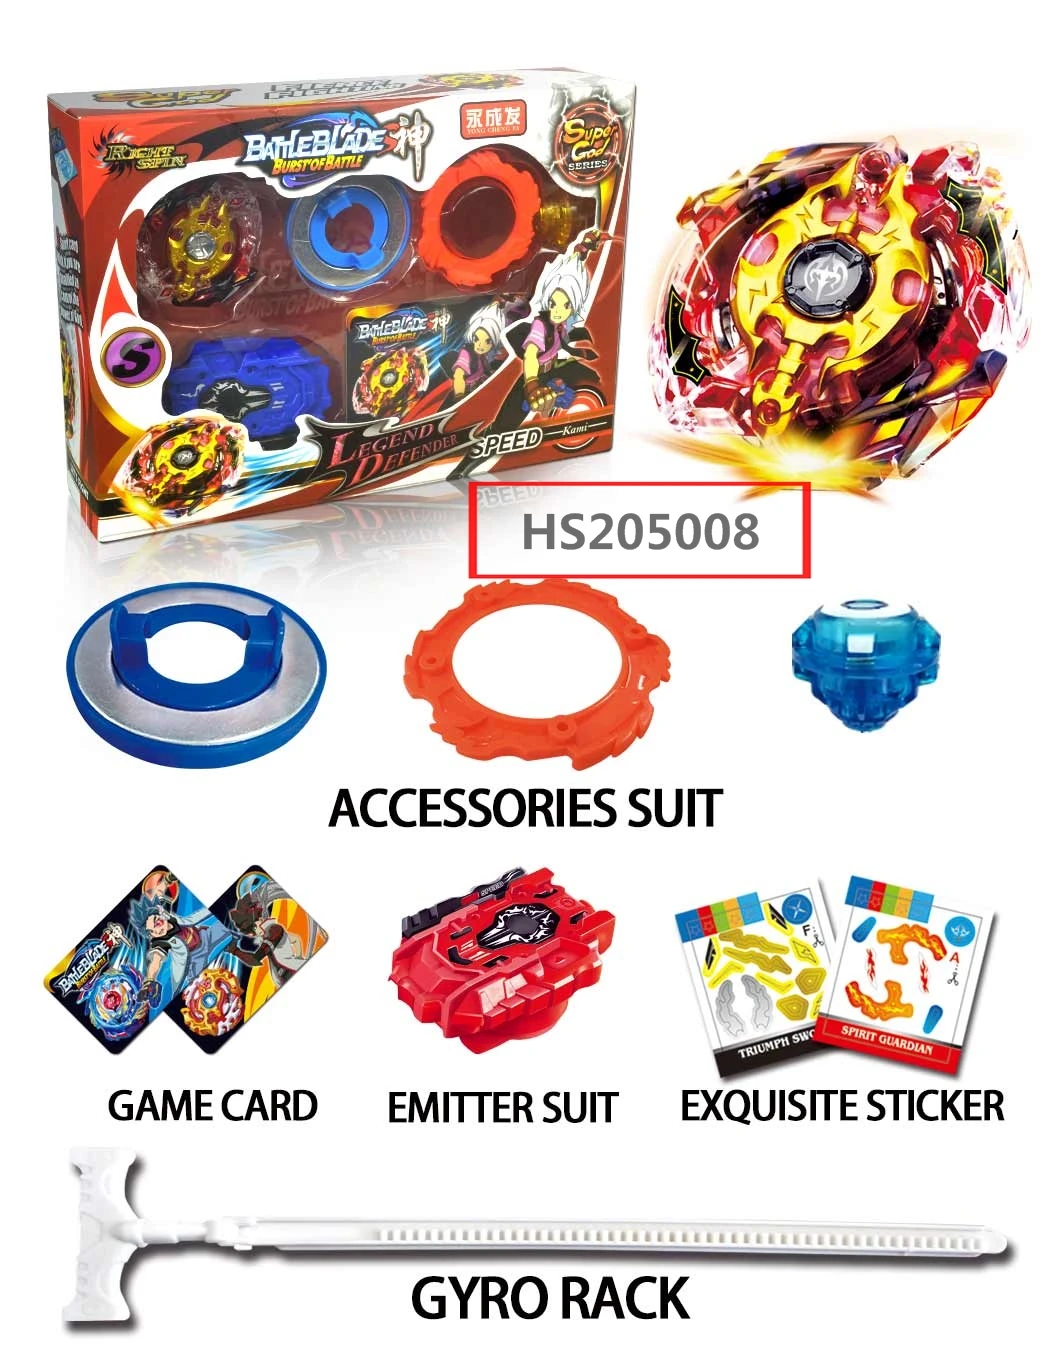 HS205008, Huwsin Toys, Metal attack ring Spinning top toy set for kids